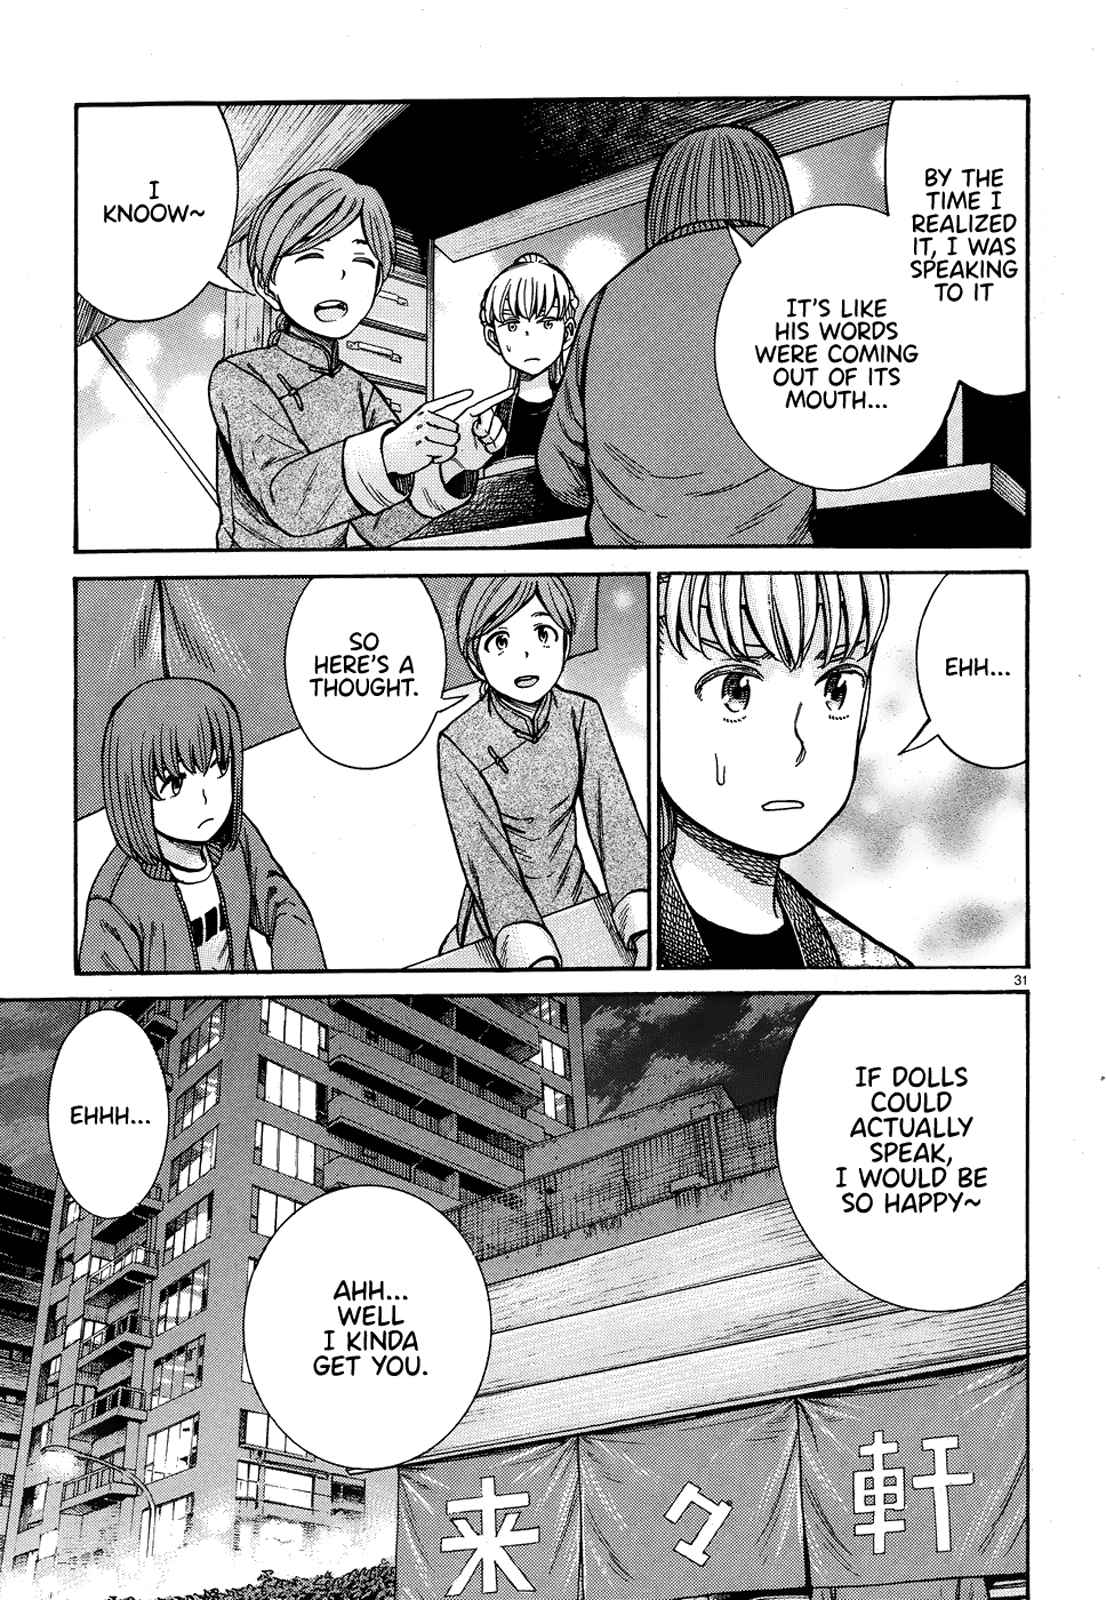 Hinamatsuri Ch. 89 This is how I play with dolls